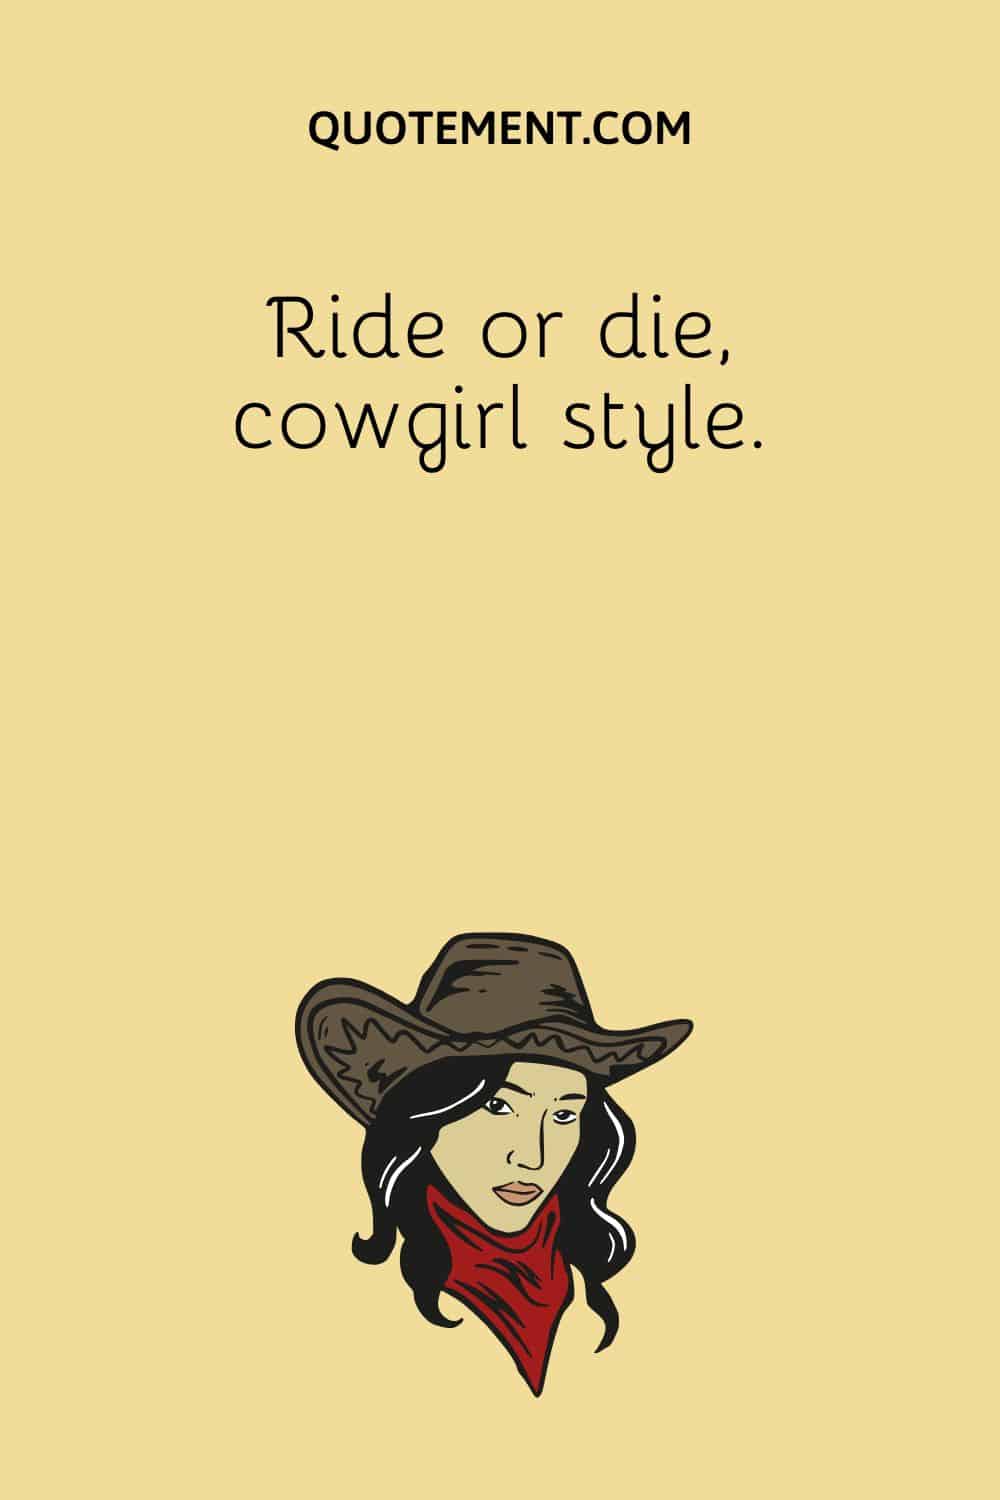 a portrait of a cowgirl
